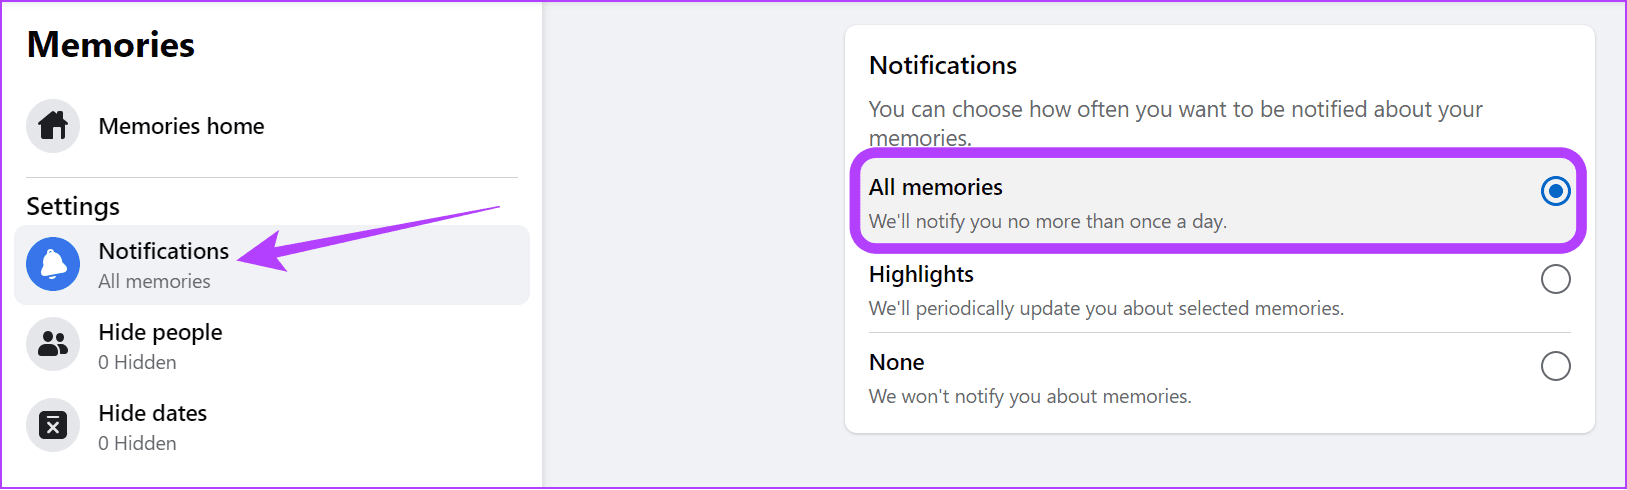 Choose Notifications and select All notifications